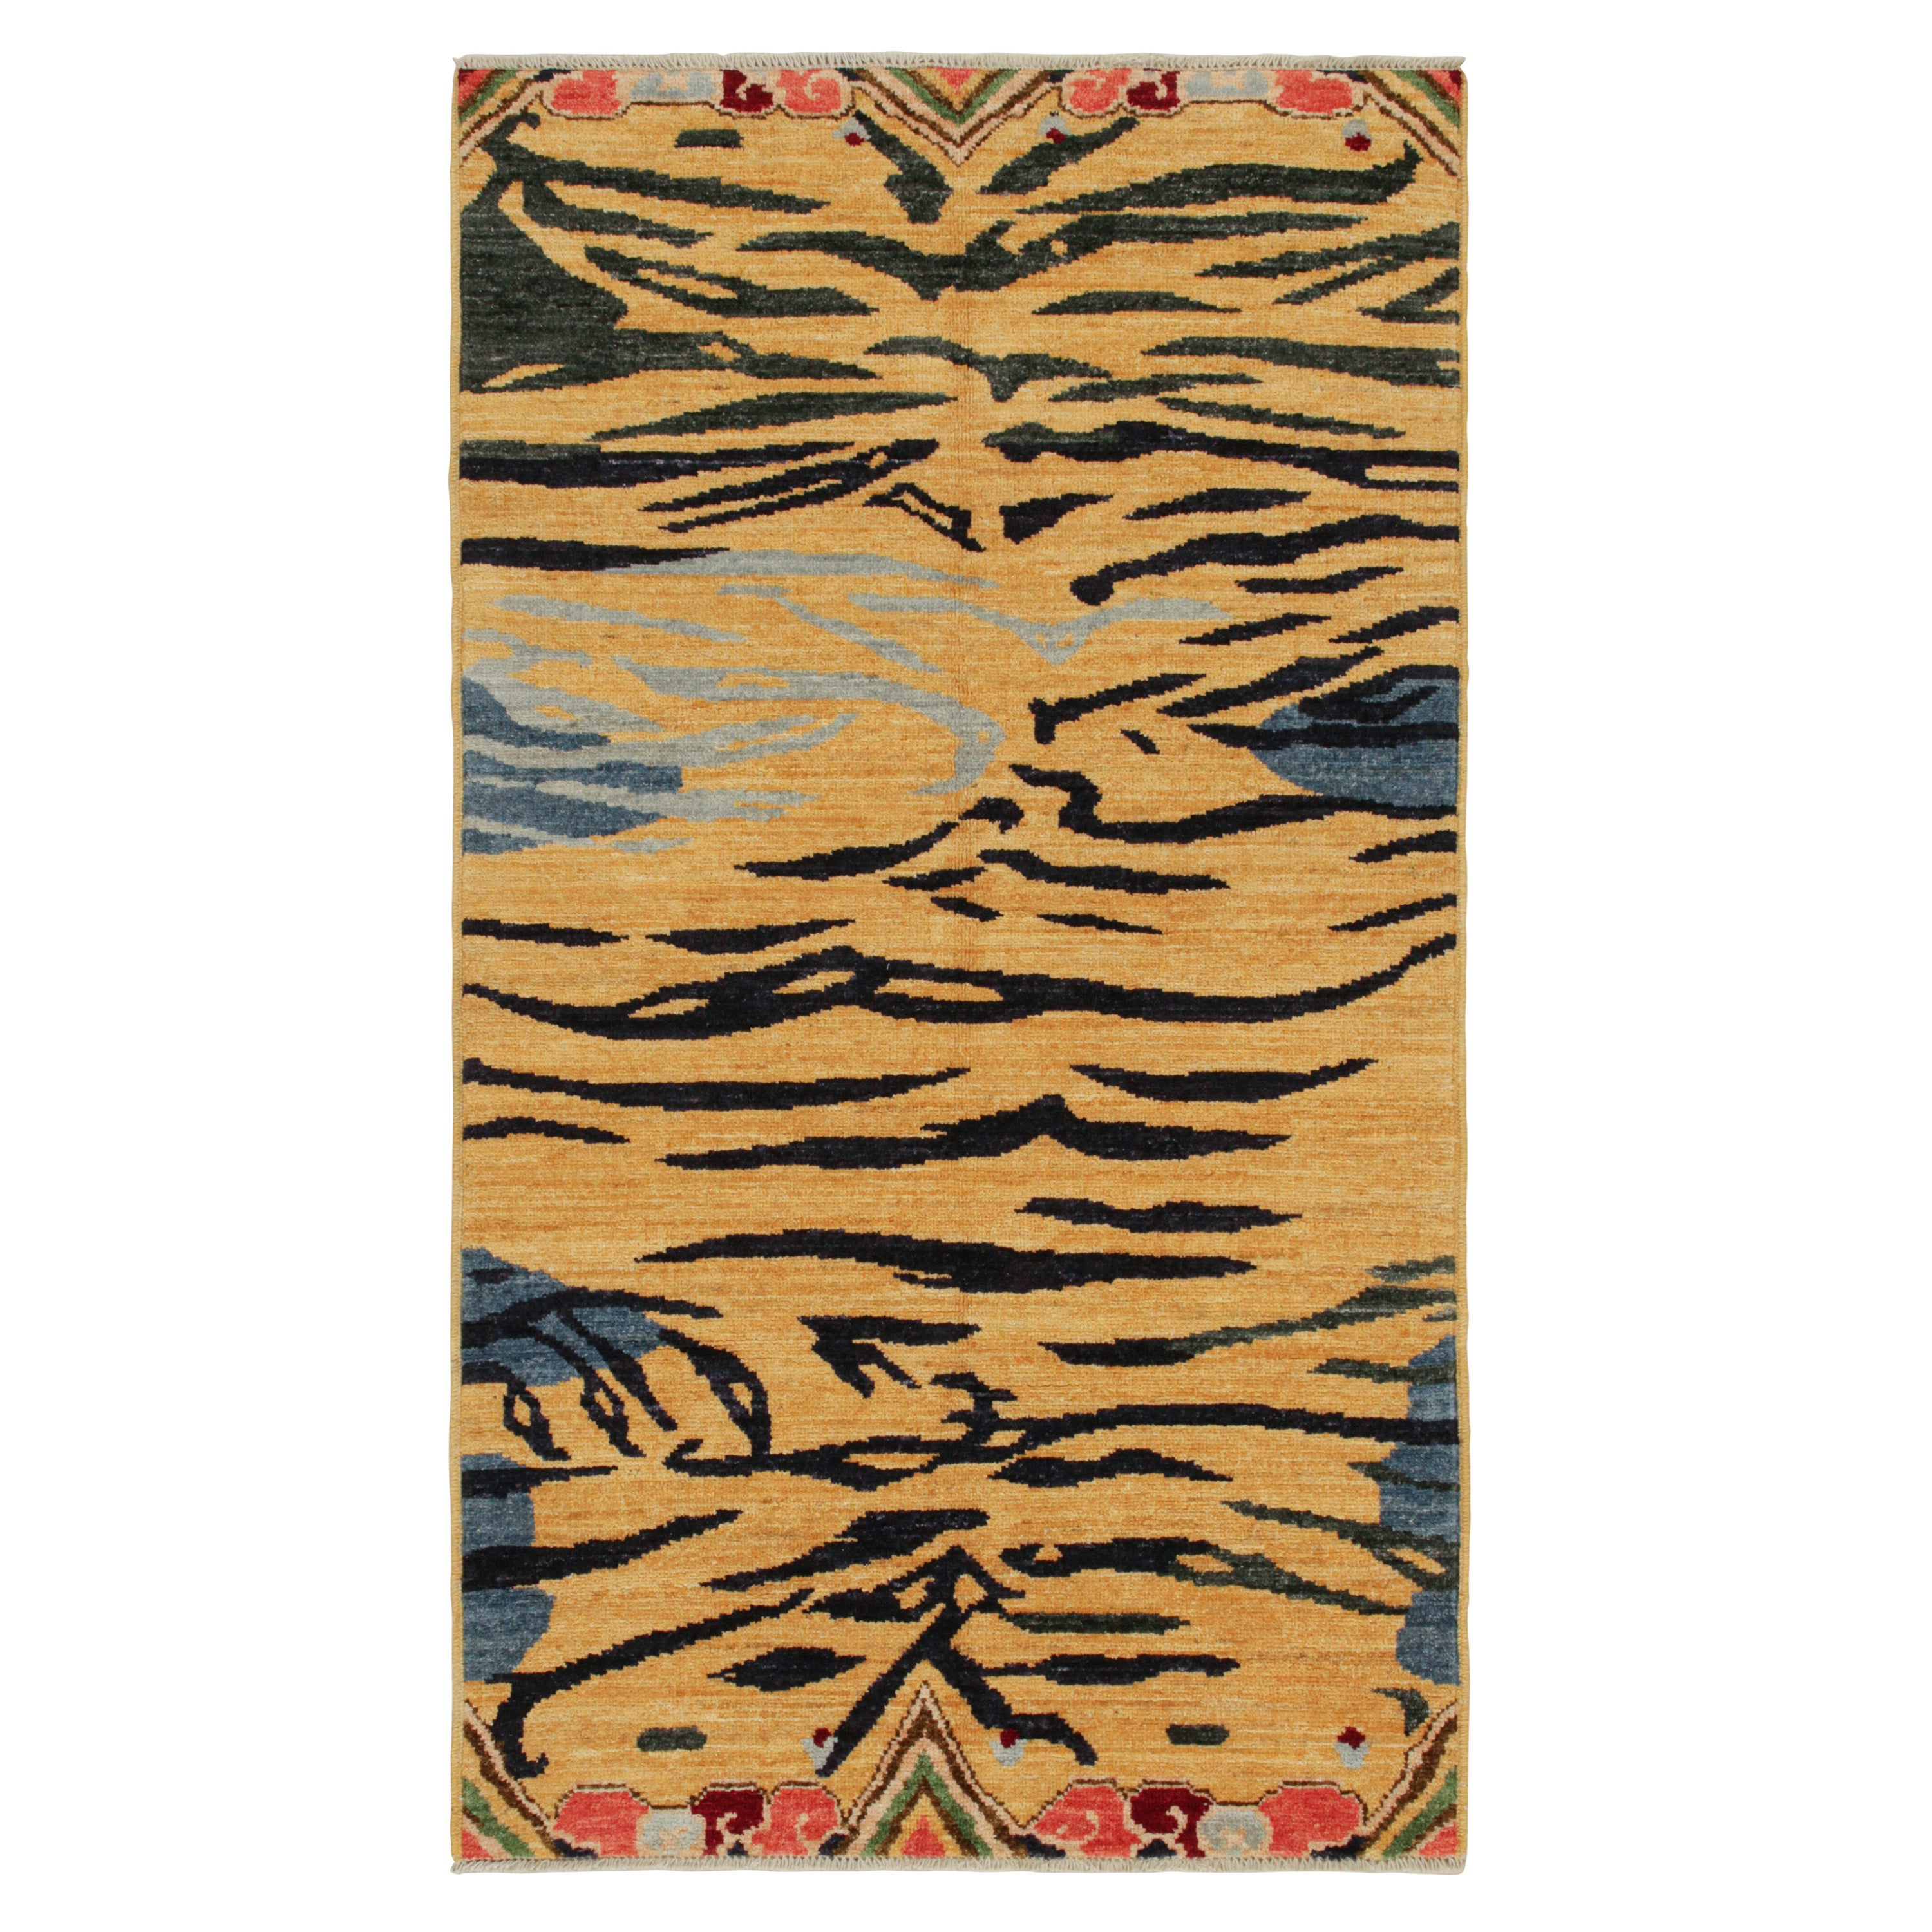 Tapis & Kilim's Classic Style Tiger-Skin Runner in Gold with Gray and Blue Stripes (Tapis & Kilim's Classic Style Tiger-Skin Runner in Gold with Gray and Blue Stripes)